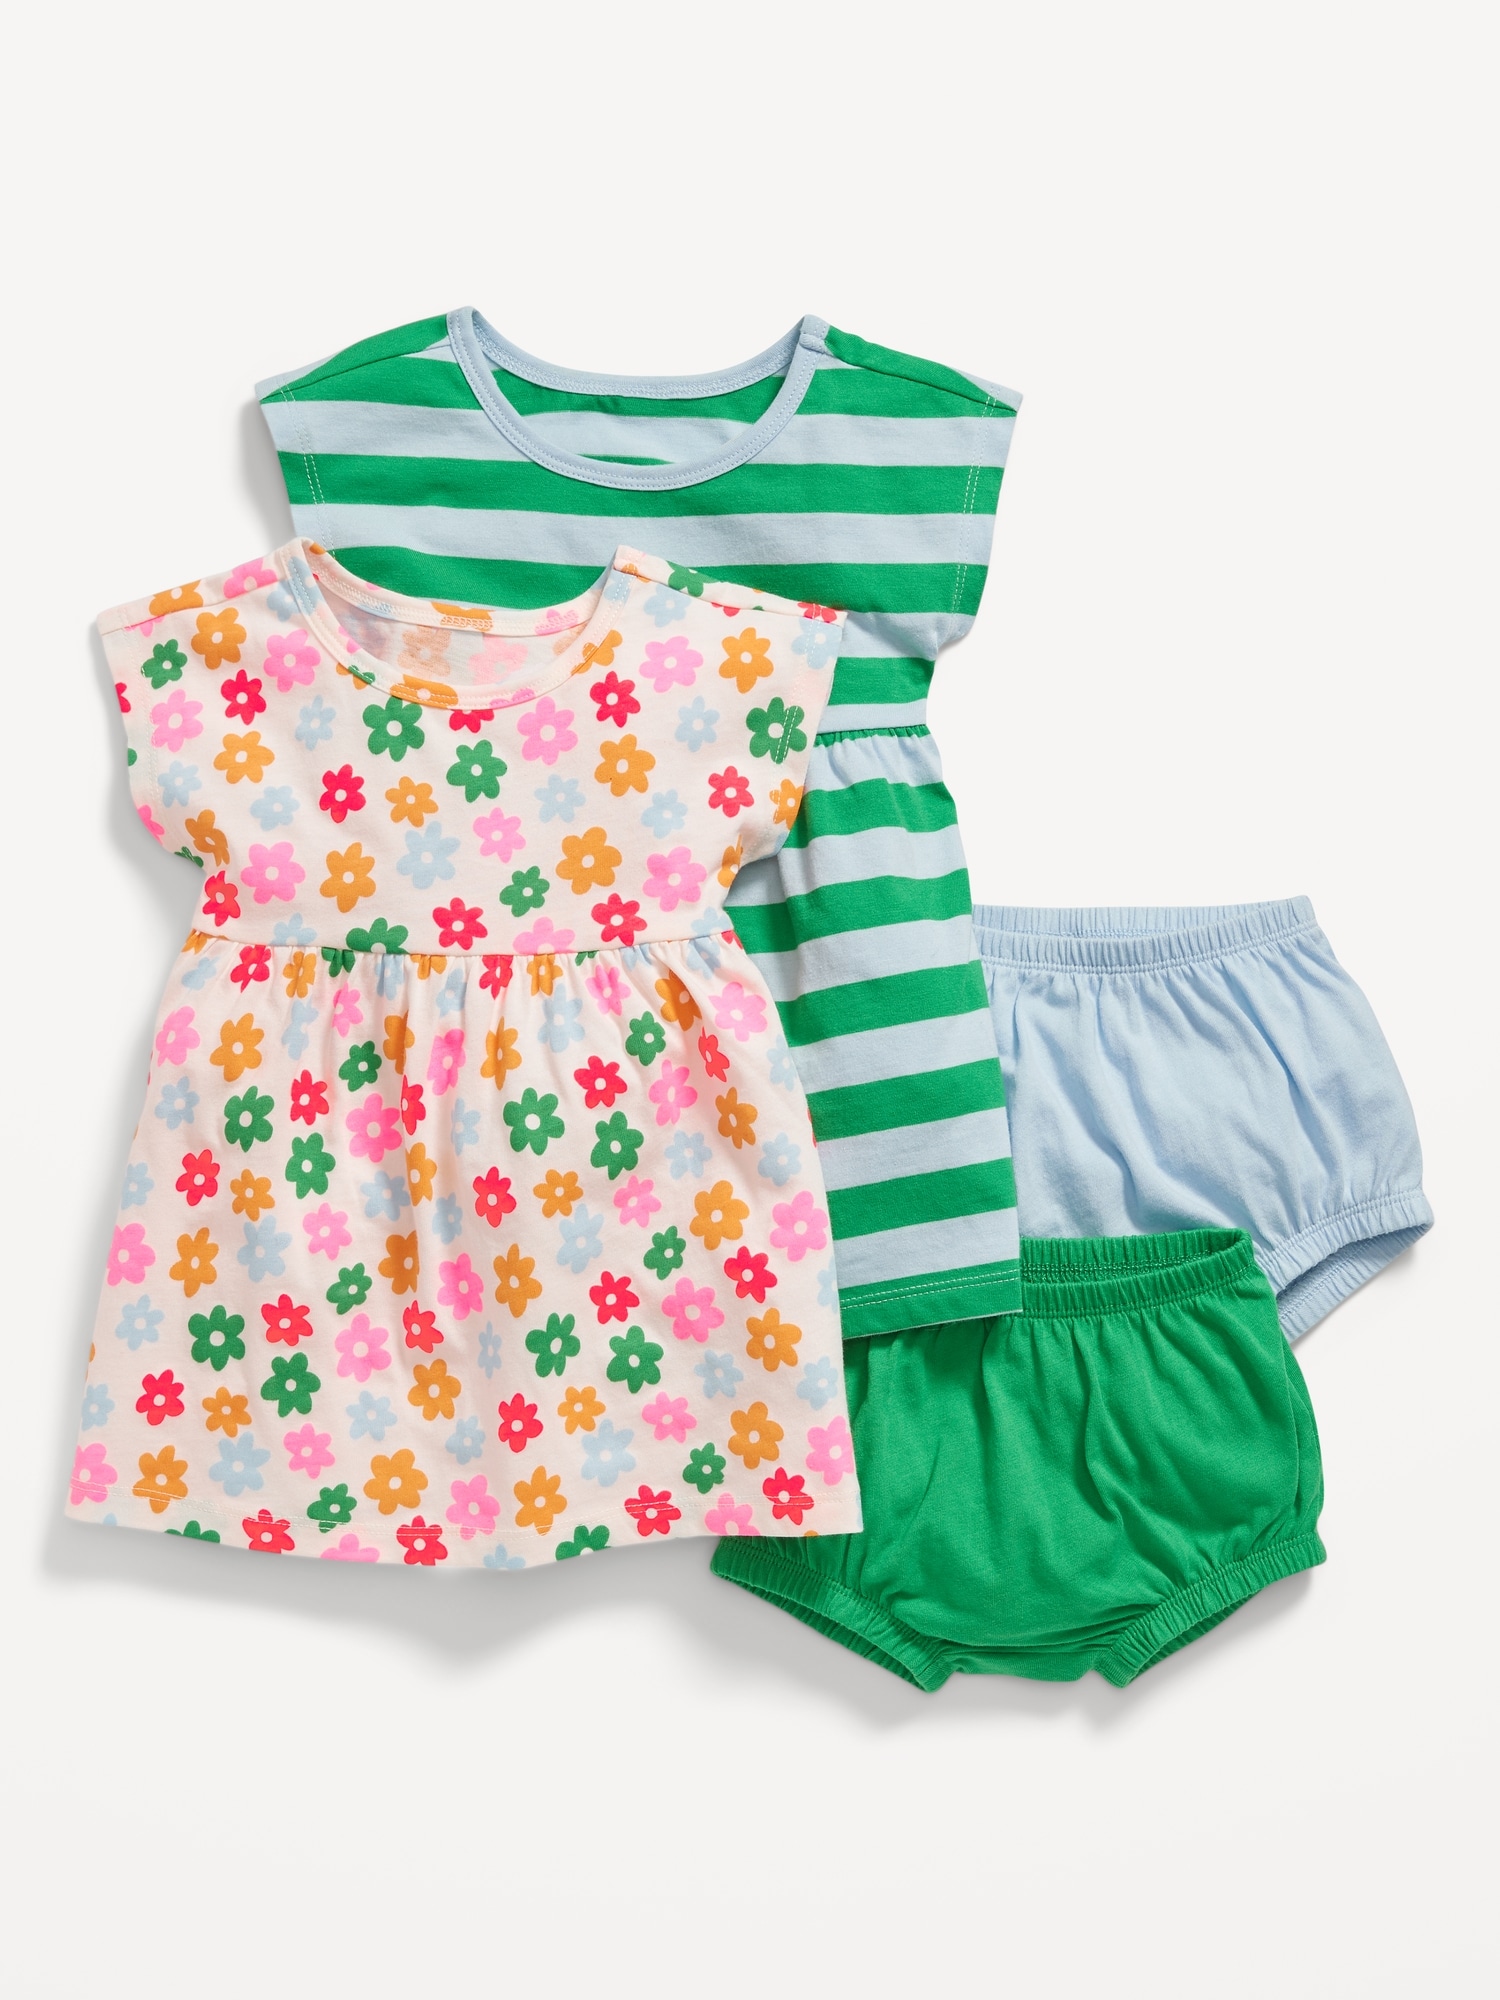 Short-Sleeve Dress and Bloomers Set for Baby Hot Deal